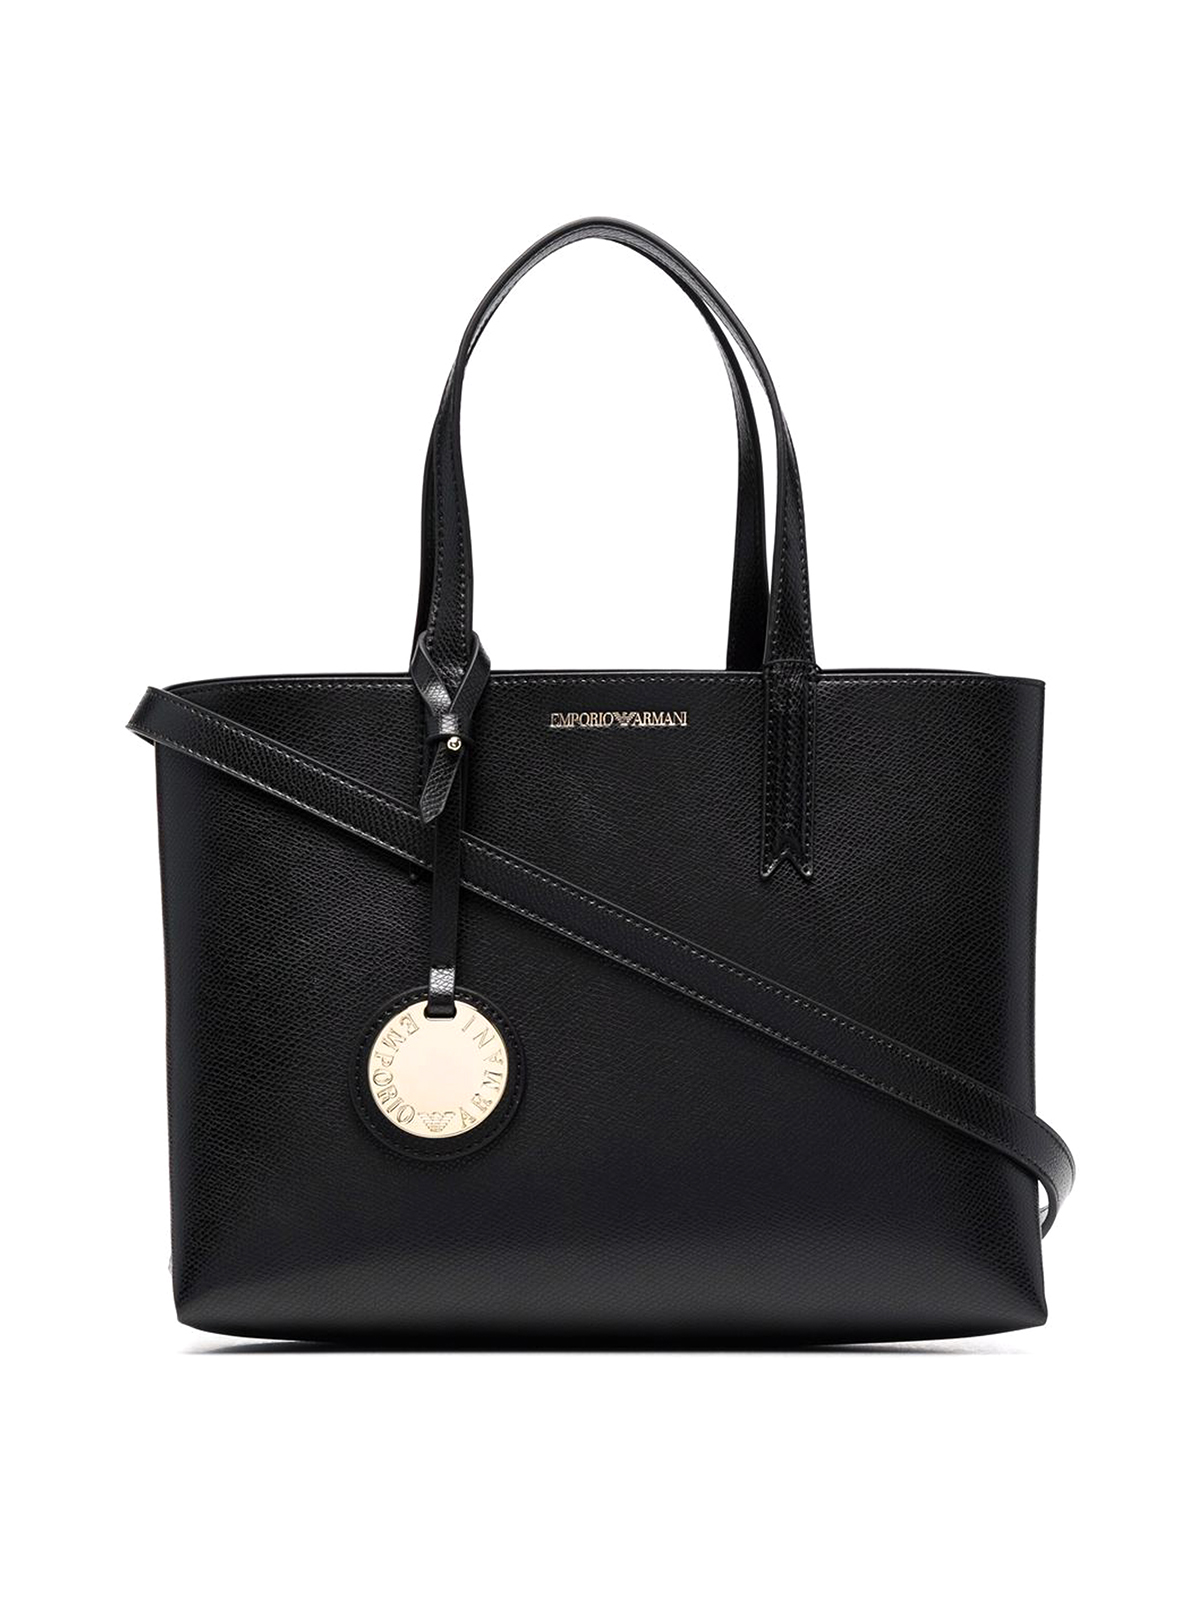 Emporio Armani Hammered Faux Leather Tote In Black